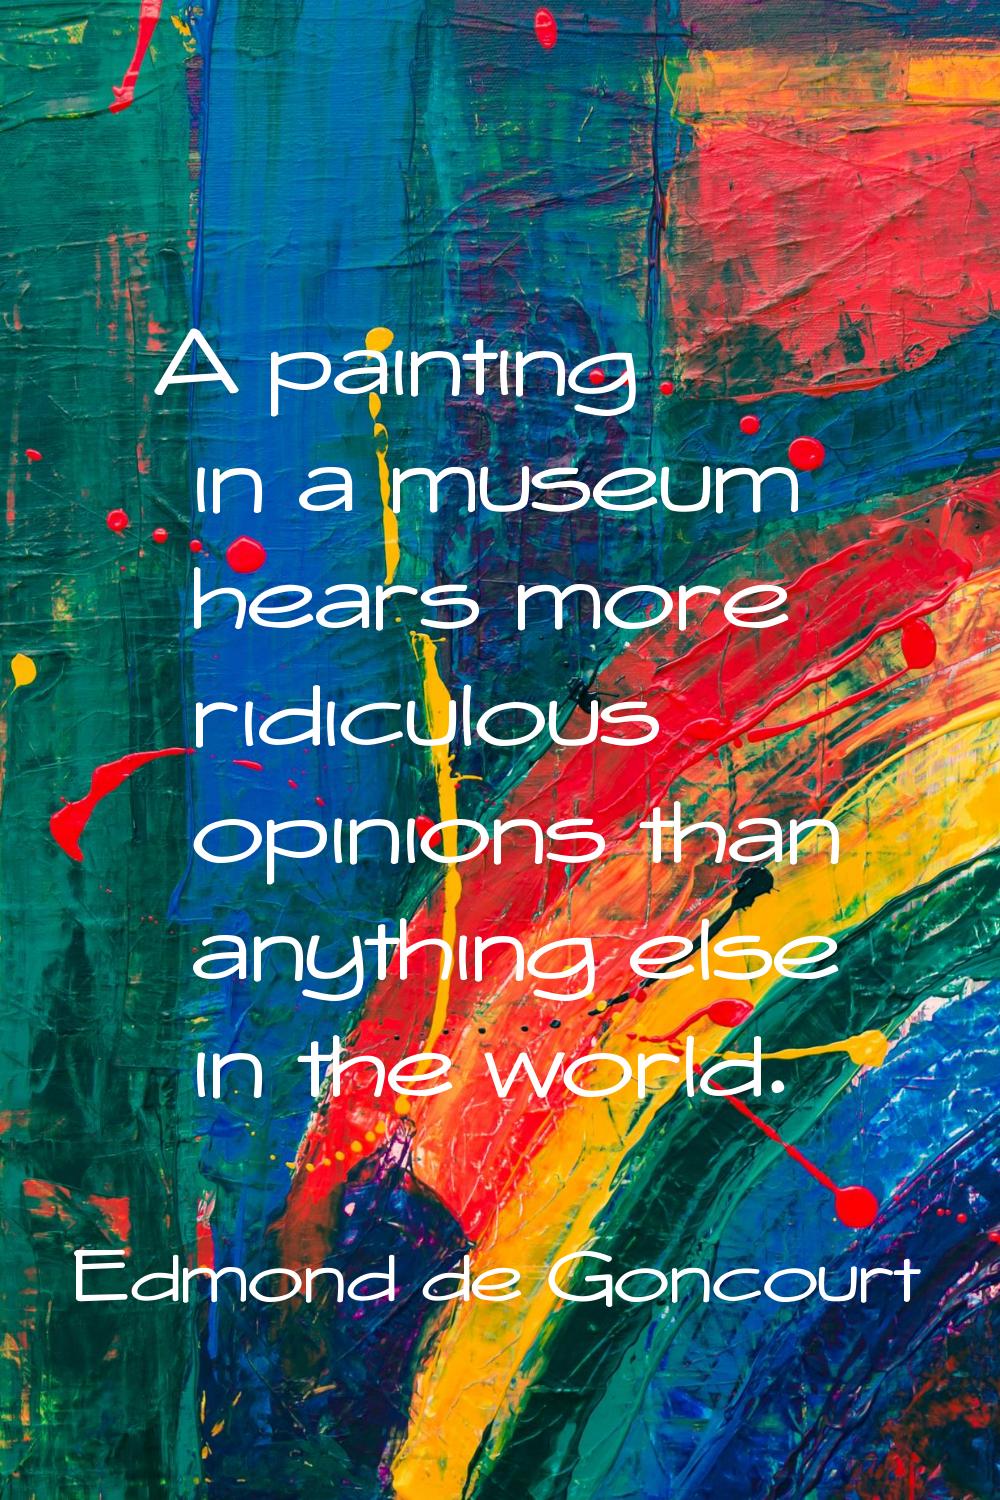 A painting in a museum hears more ridiculous opinions than anything else in the world.